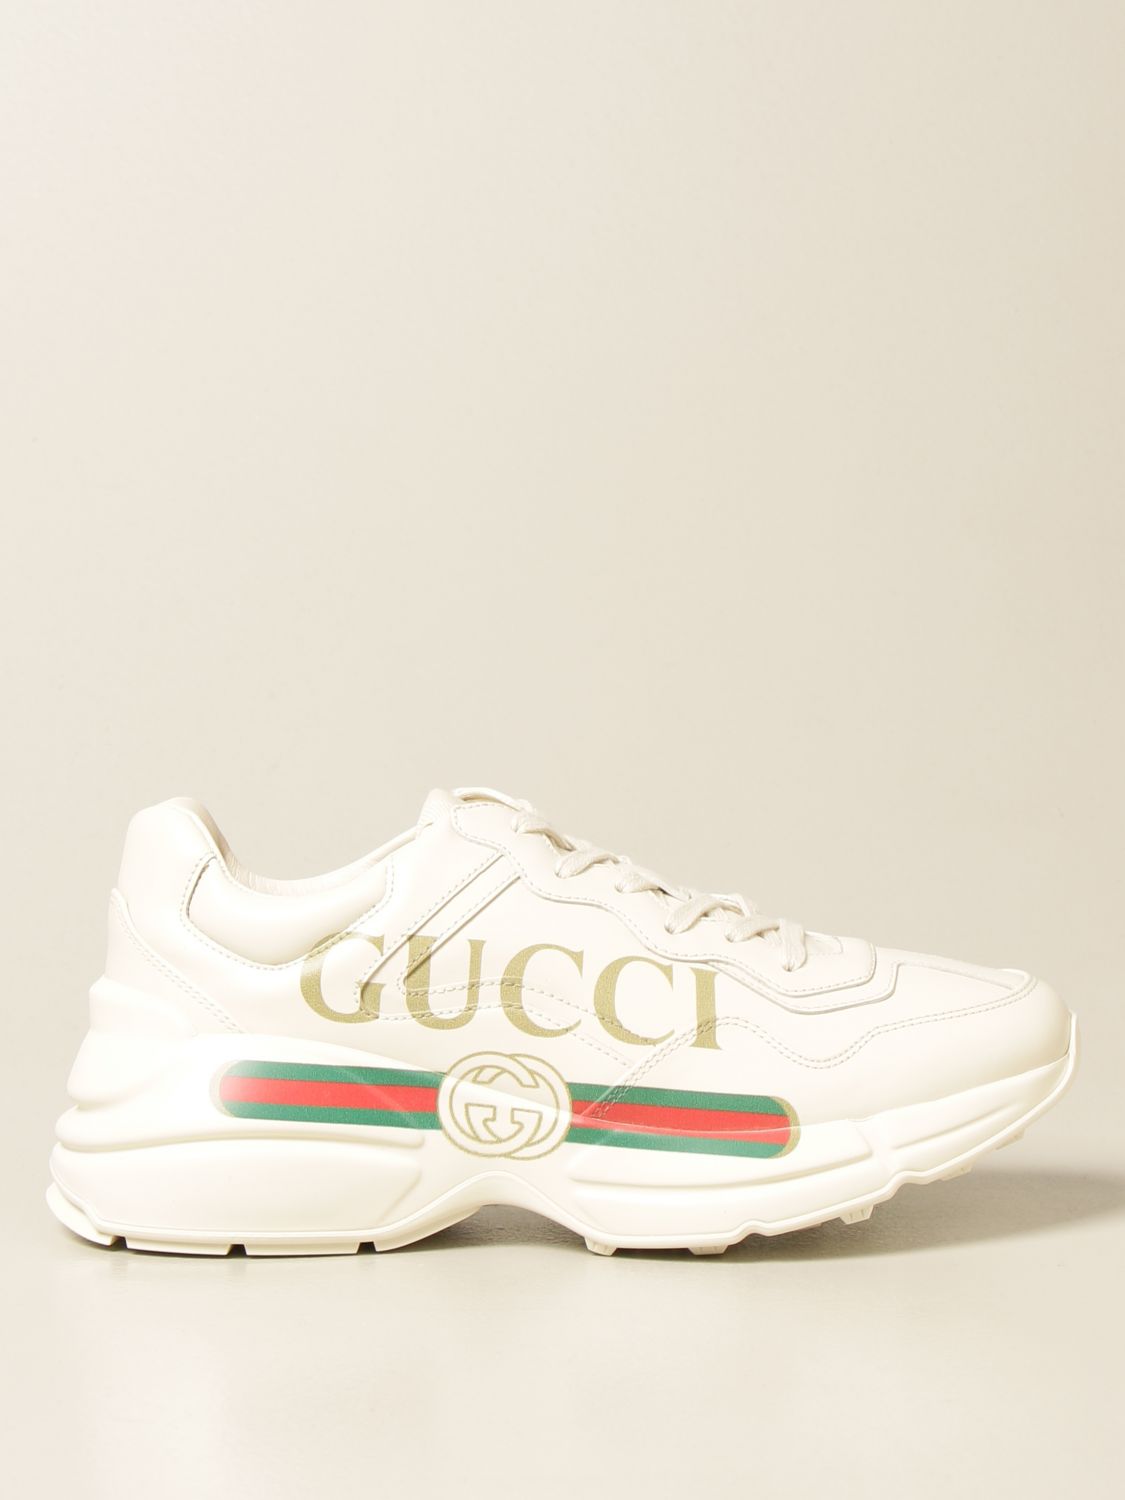 gucci 2018 sneakers